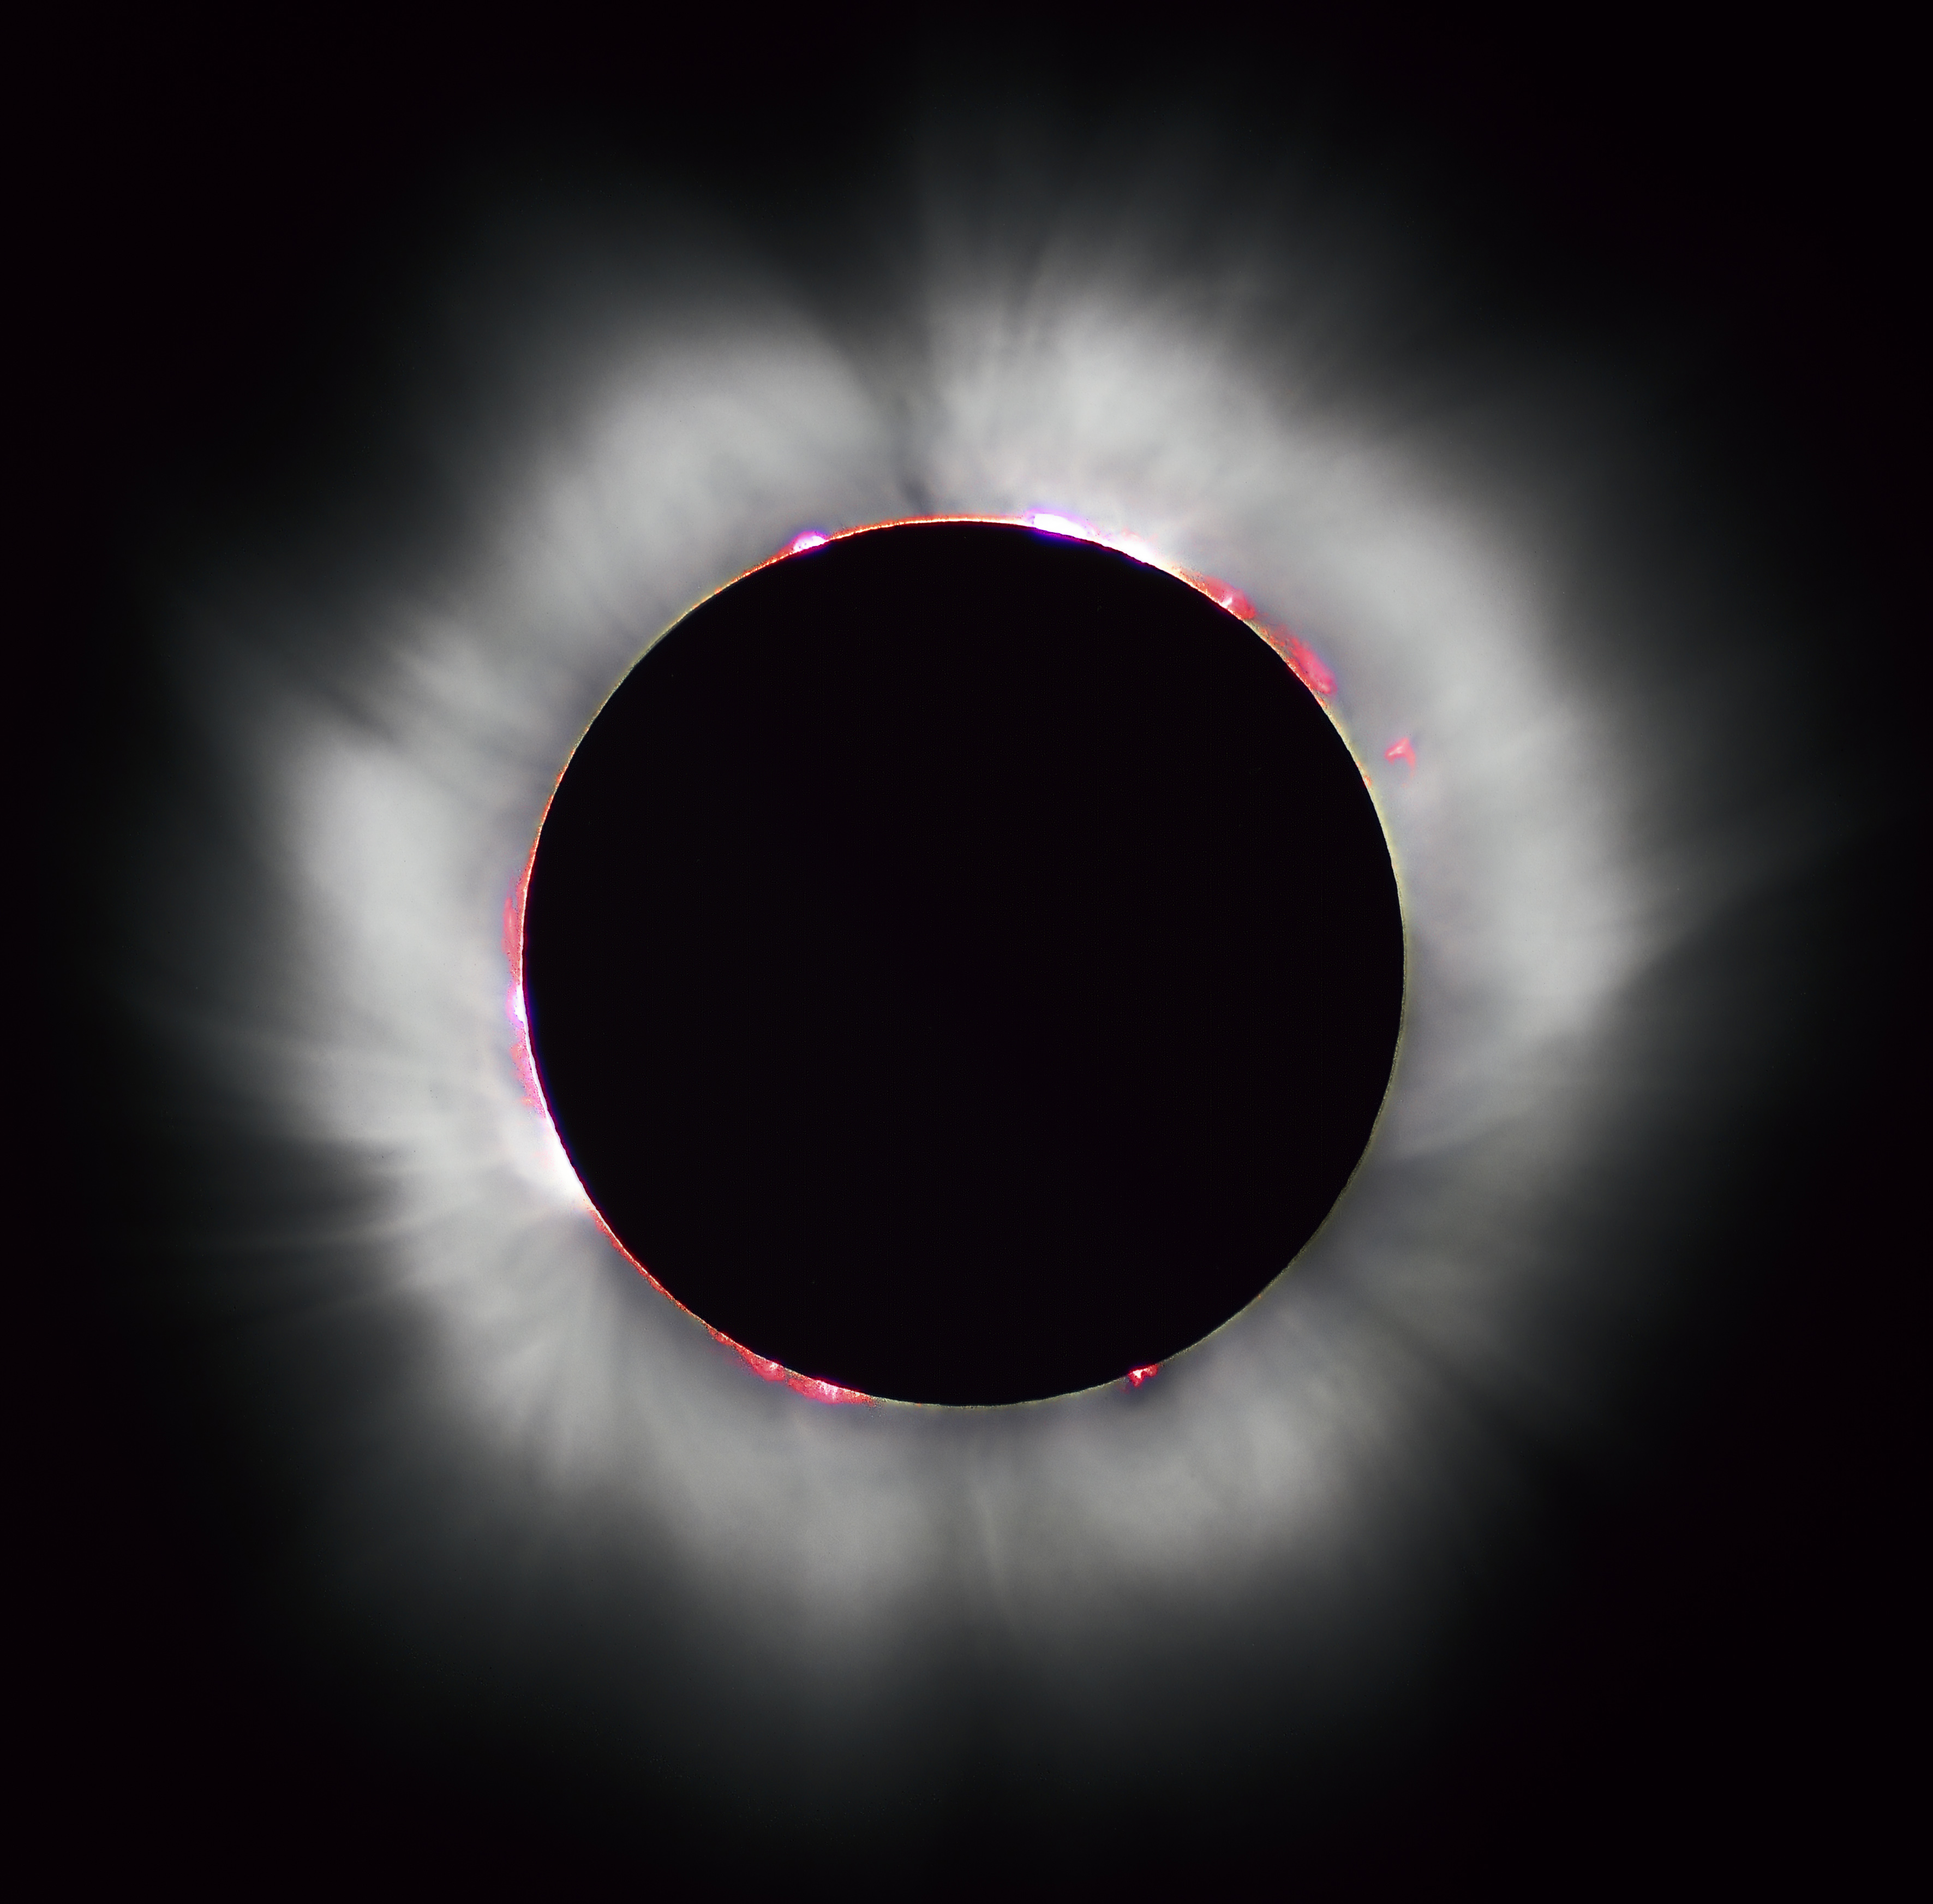 A total solar eclipse occurs when the Moon completely covers the Sun's disk, as seen in this 1999 solar eclipse.